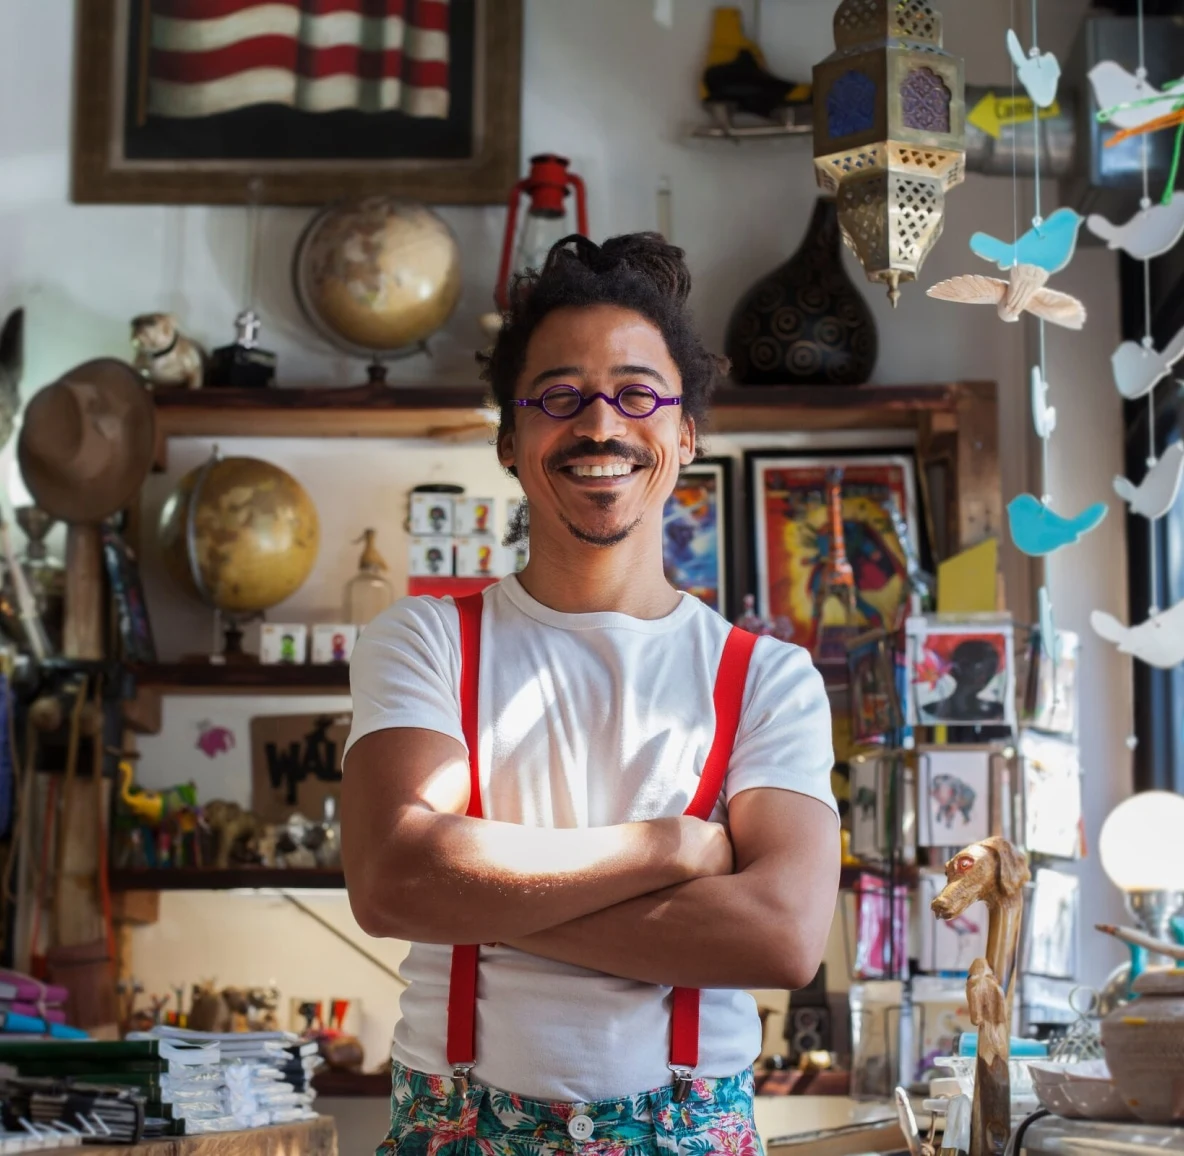 A smiling Black man with locs and red suspenders stands in a curio shop, arms crossed